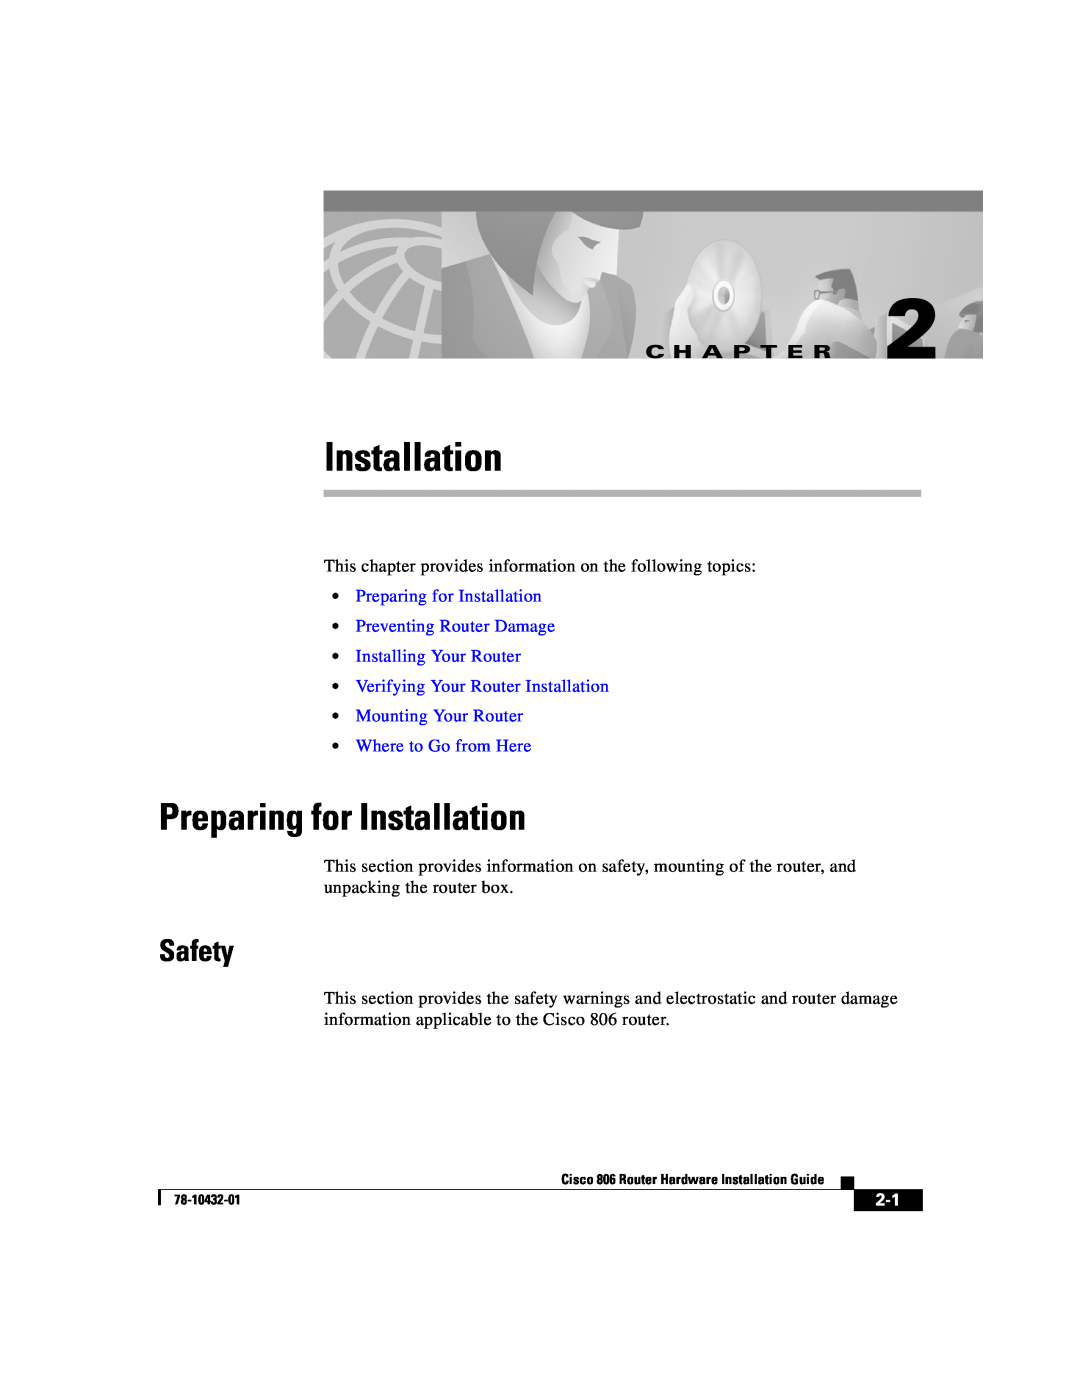 Cisco Systems 806 manual Safety, Preparing for Installation Preventing Router Damage, C H A P T E R 